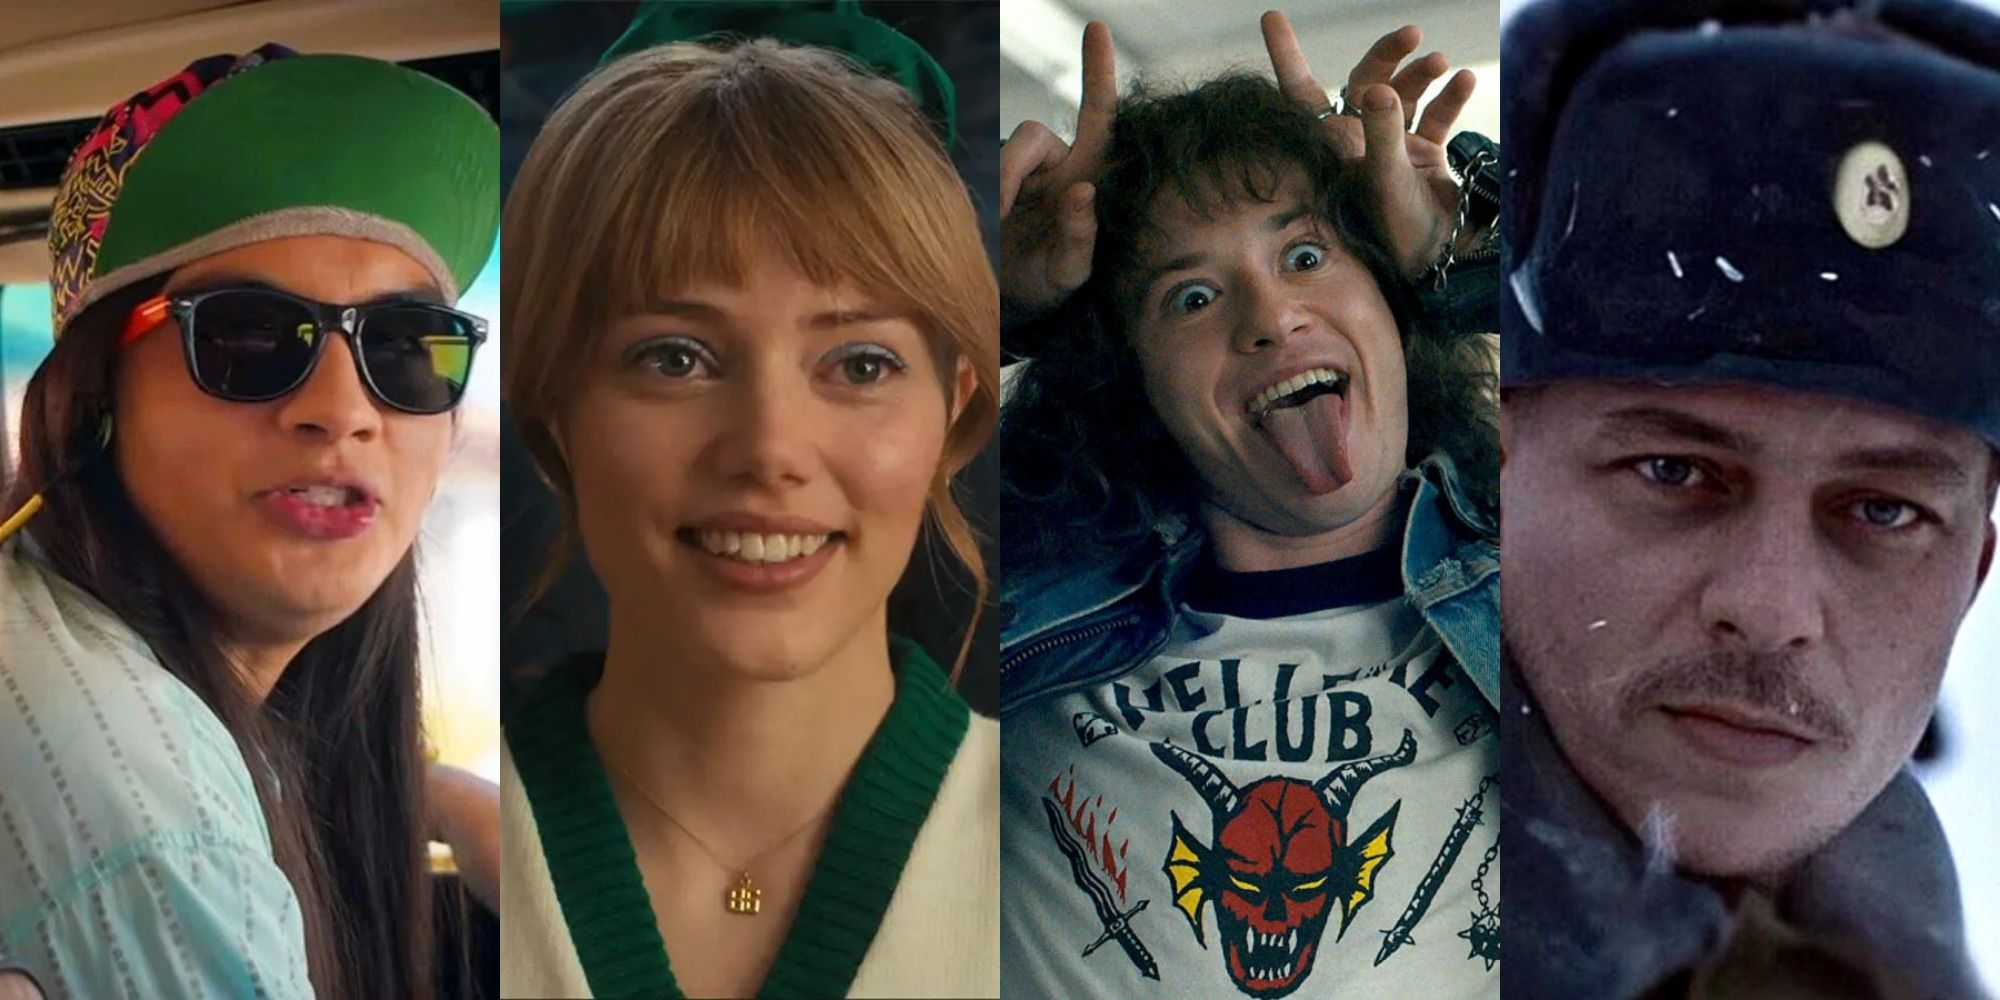 Stranger Things' Season 4: The New Characters, Ranked